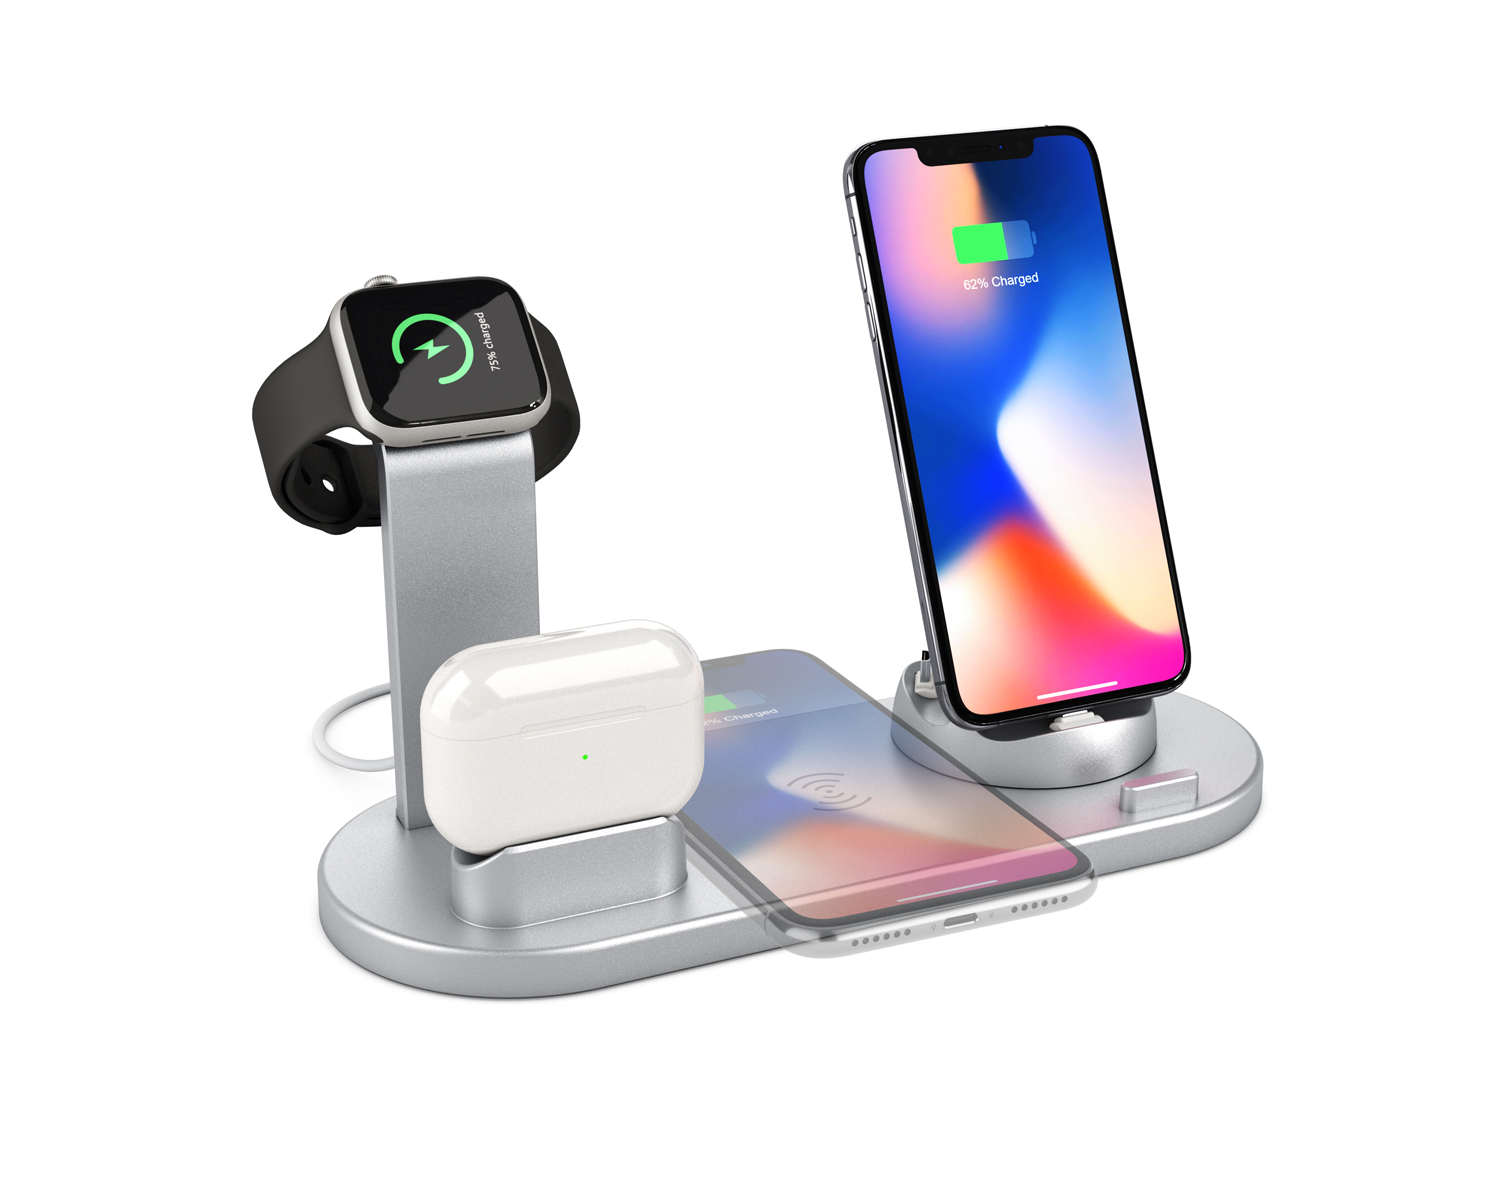 4 In 1 Fast Wireless Charging Station And Multiple Charging Dock For AirPods And Lightning Type-c Micro USB Port Phones With USB Charging Port For iWatch (MH-Q465)